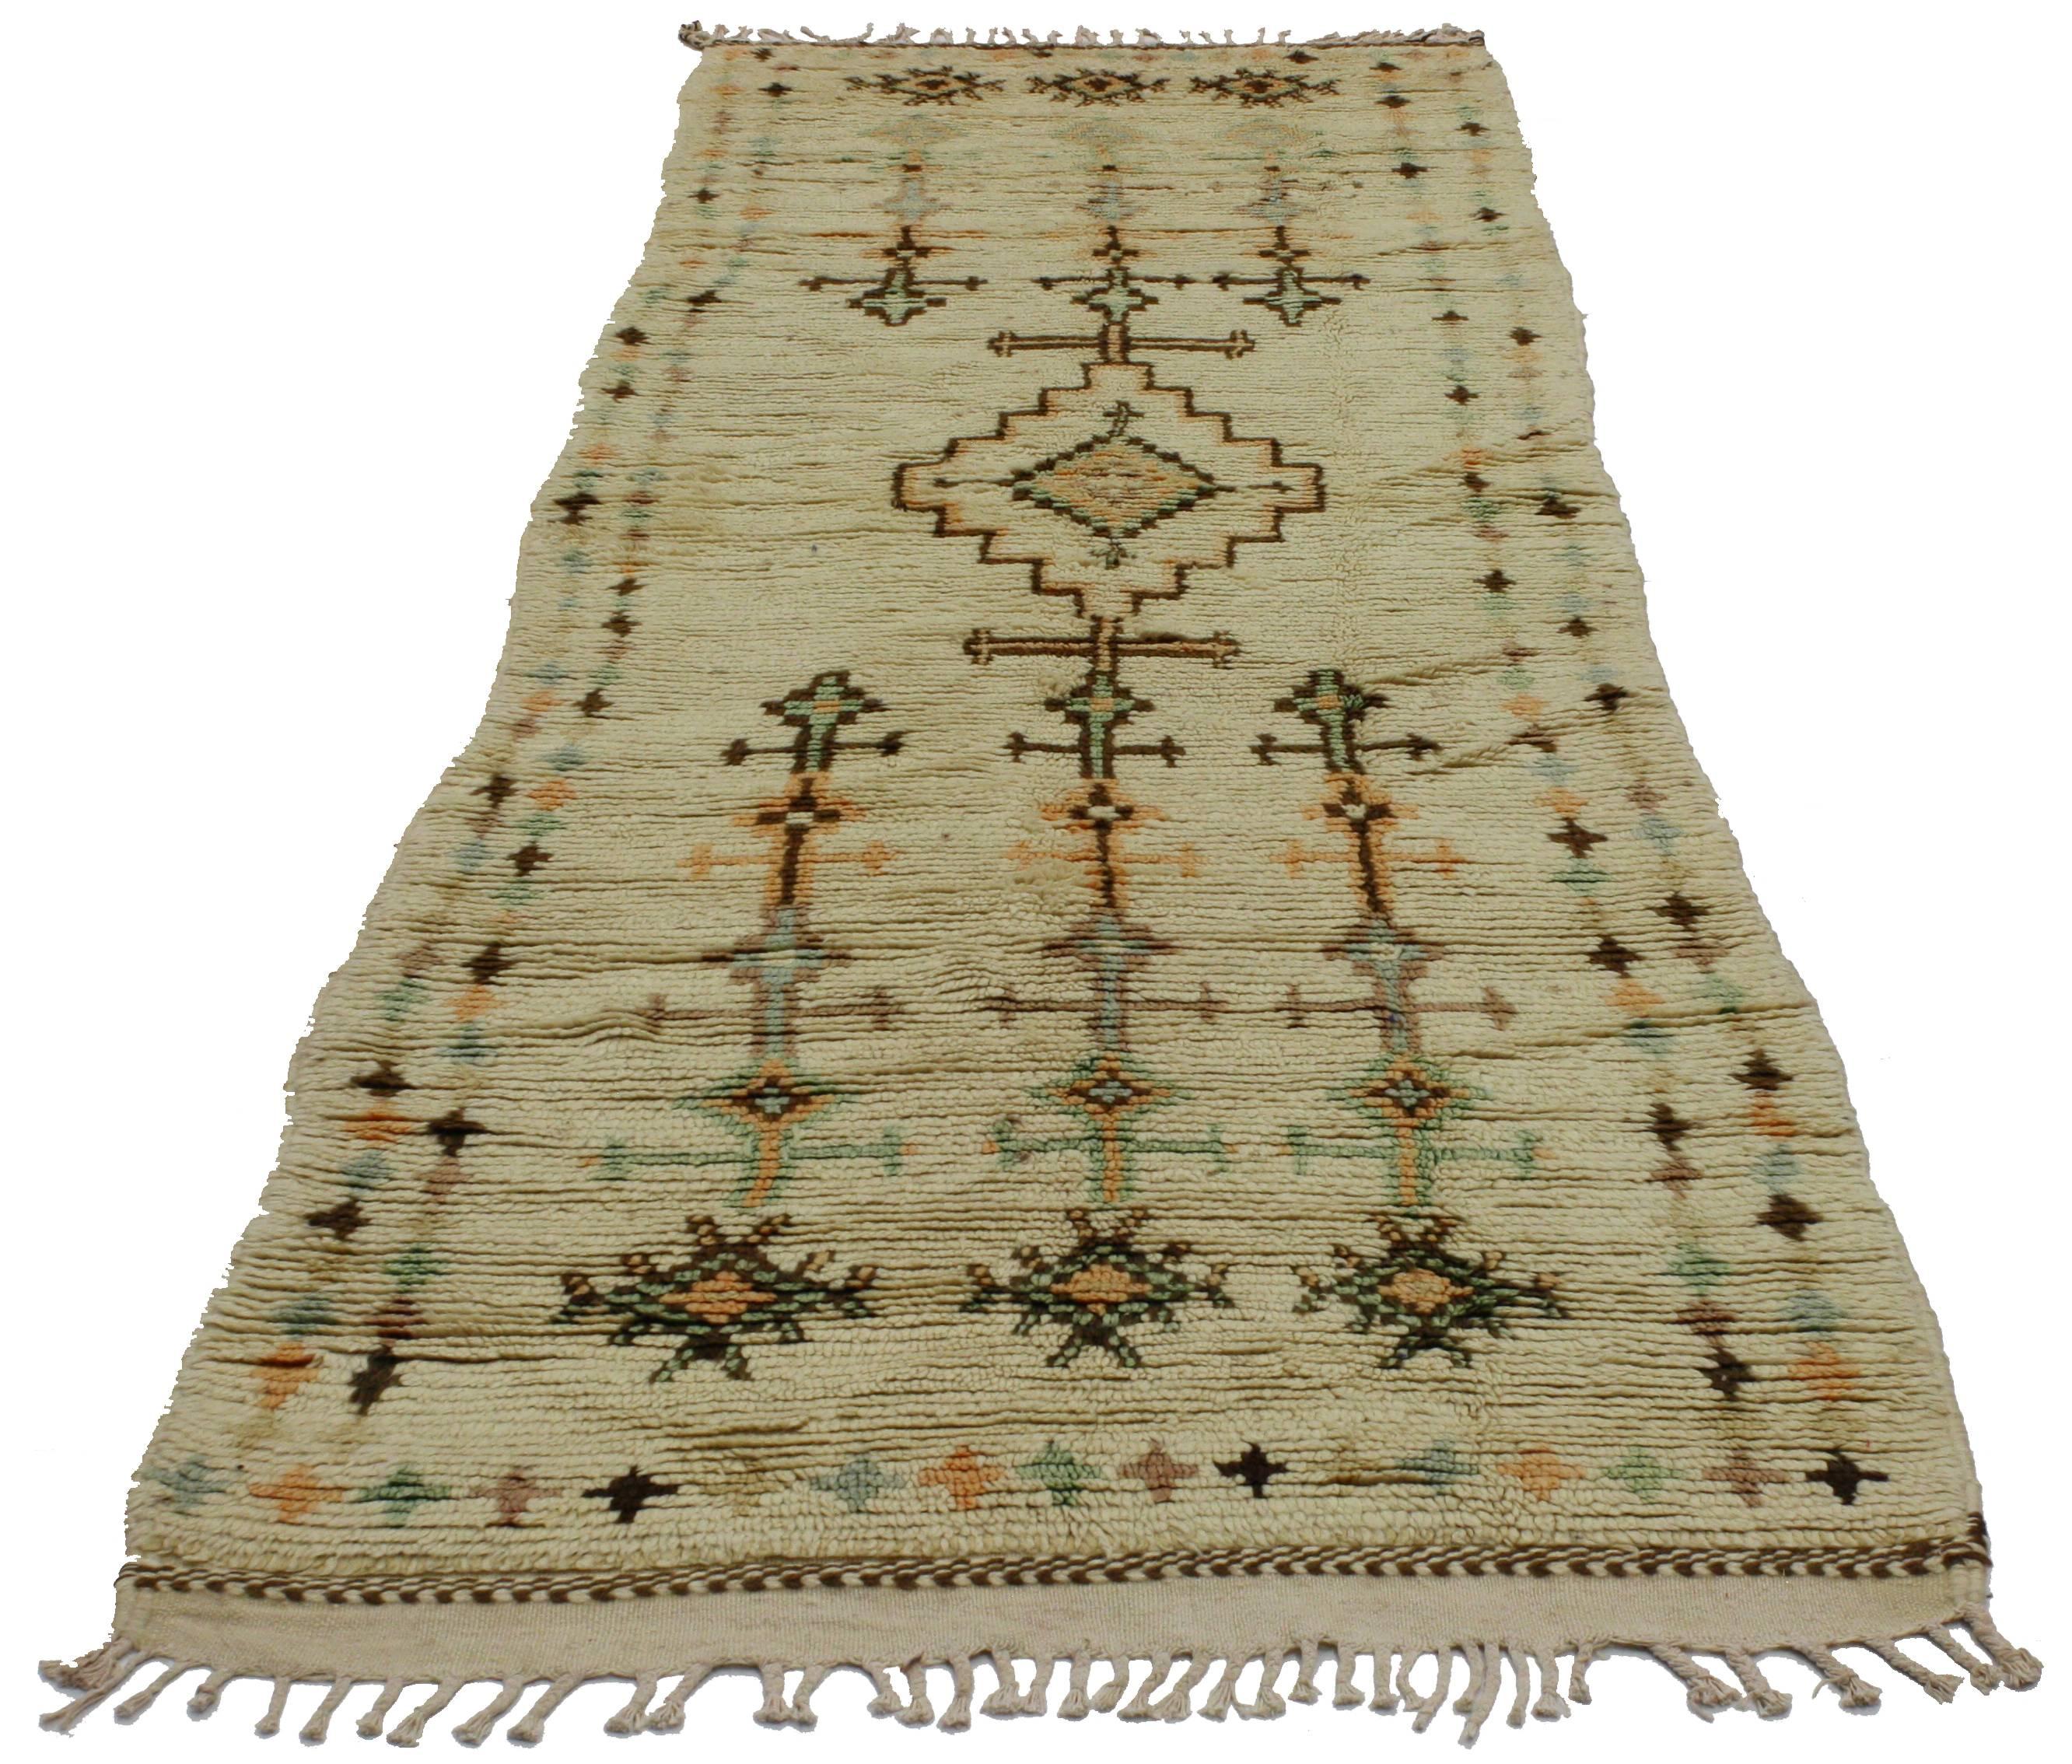 Handmade in Morocco, this fascinating Berber Moroccan runner with tribal design in light colors features a beautiful assortment of geometric motifs arranged in a well-balanced composition. With its vintage vibes and tribal facade, this Moroccan